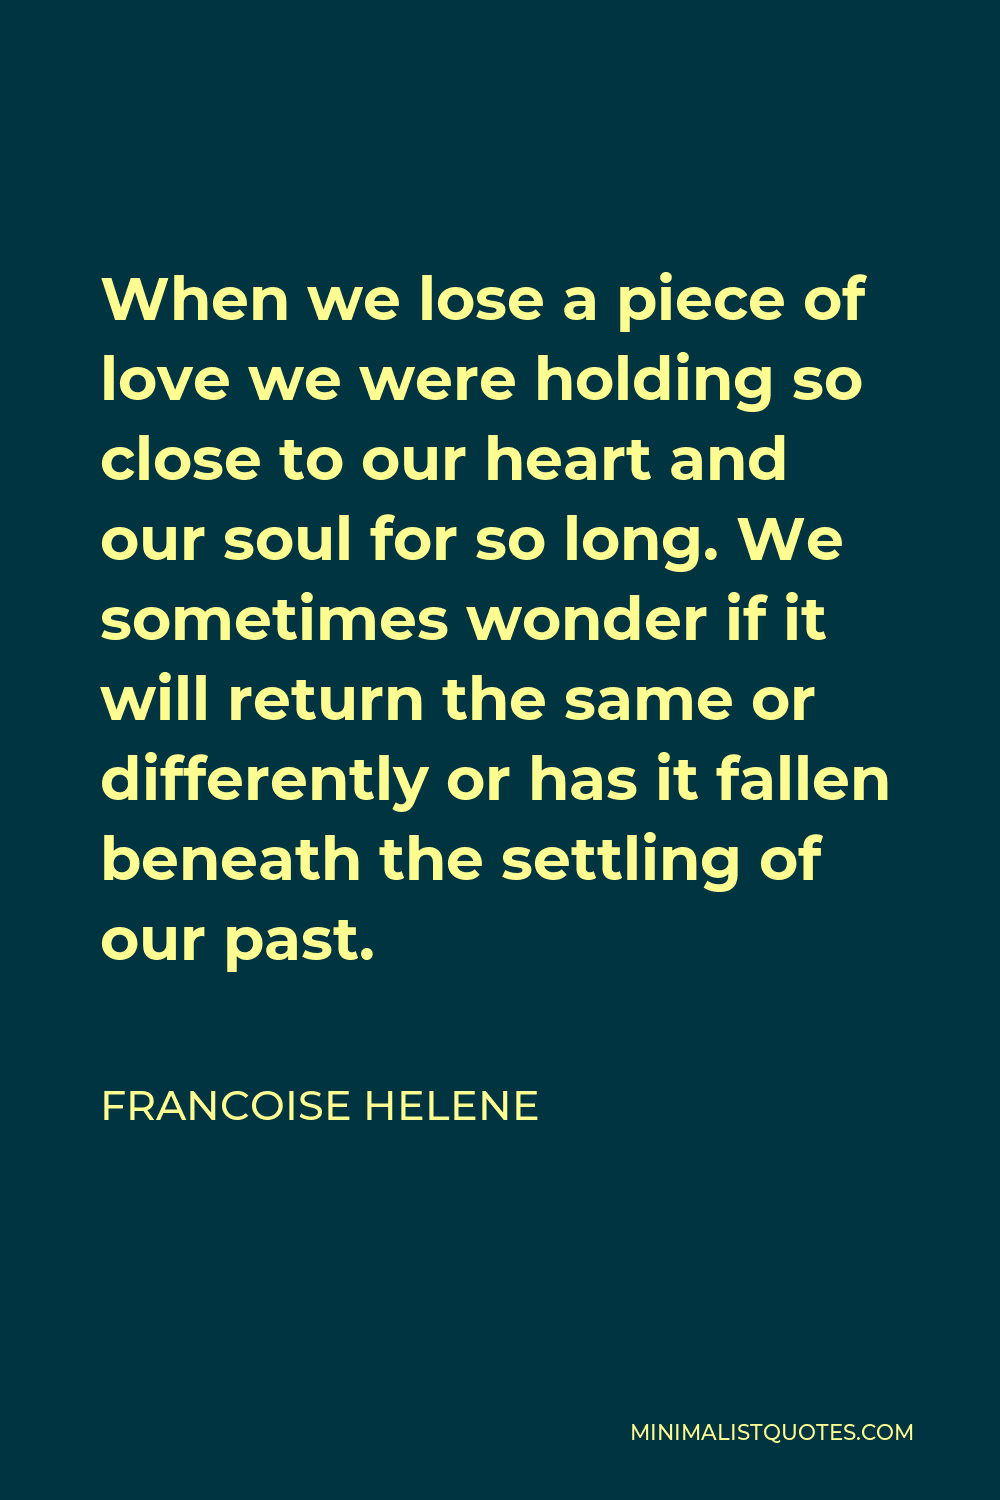 Francoise Helene Quote - When we lose a piece of love we were holding so close to our heart and our soul for so long. We sometimes wonder if it will return the same or differently or has it fallen beneath the settling of our past.